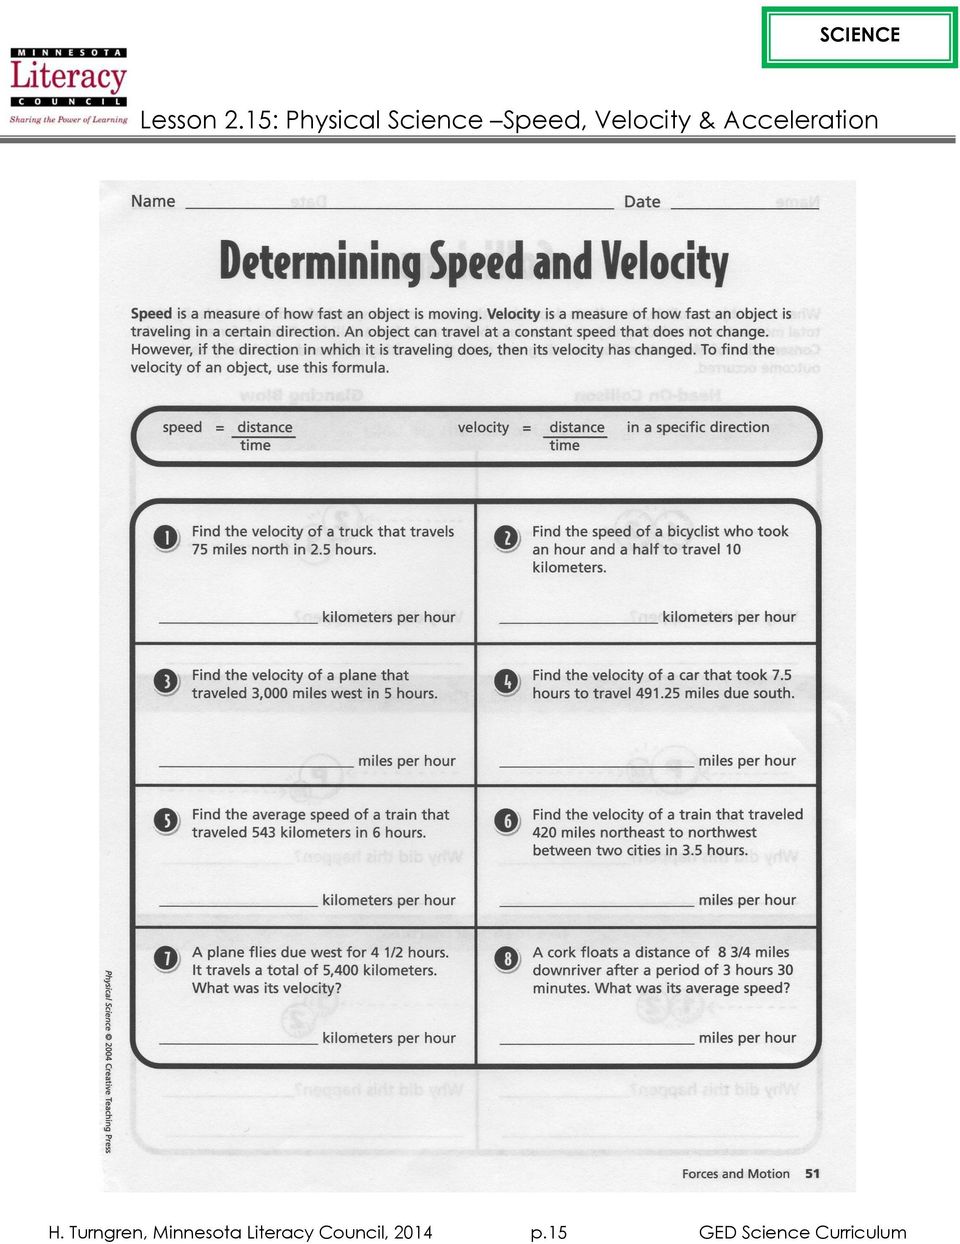 Lesson 20.20: Physical Science Speed, Velocity & Acceleration - PDF Throughout Determining Speed Velocity Worksheet